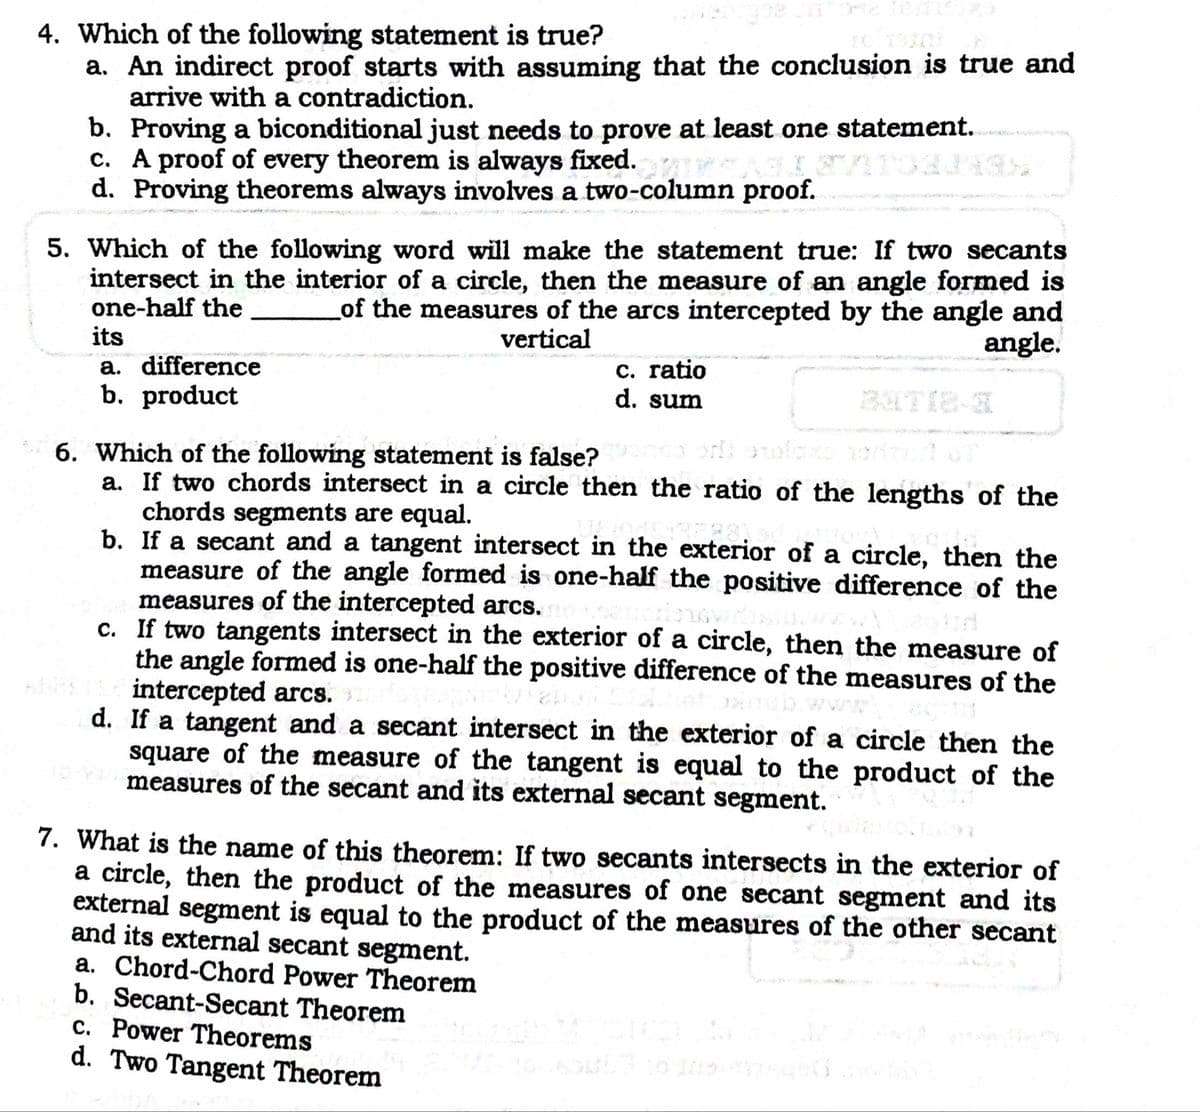 4. Which of the following statement is true?
a. An indirect proof starts with assuming that the conclusion is true and
arrive with a contradiction.
b. Proving a biconditional just needs to prove at least one statement.
c. A proof of every theorem is always fixed.
d. Proving theorems always involves a two-column proof.
5. Which of the following word will make the statement true: If two secants
intersect in the interior of a circle, then the measure of an angle formed is
one-half the
its
of the measures of the arcs intercepted by the angle and
angle.
vertical
a. difference
b. product
C. ratio
d. sum
6. Which of the following statement is false?
a. If two chords intersect in a circle then the ratio of the lengths of the
chords segments are equal.
b. If a secant and a tangent intersect in the exterior of a circle, then the
measure of the angle formed is one-half the positive difference of the
measures of the intercepted arcs.
c. If two tangents intersect in the exterior of a circle, then the measure of
the angle formed is one-half the positive difference of the measures of the
intercepted arcs.
d. If a tangent and a secant intersect in the exterior of a circle then the
square of the measure of the tangent is equal to the product of the
measures of the secant and its external secant segment.
C.
7. What is the name of this theorem: If two secants intersects in the exterior of
a circle, then the product of the measures of one secant segment and its
external segment is equal to the product of the measures of the other secant
and its external secant segment.
a. Chord-Chord Power Theorem
b. Secant-Secant Theorem
c. Power Theorems
d. Two Tangent Theorem
